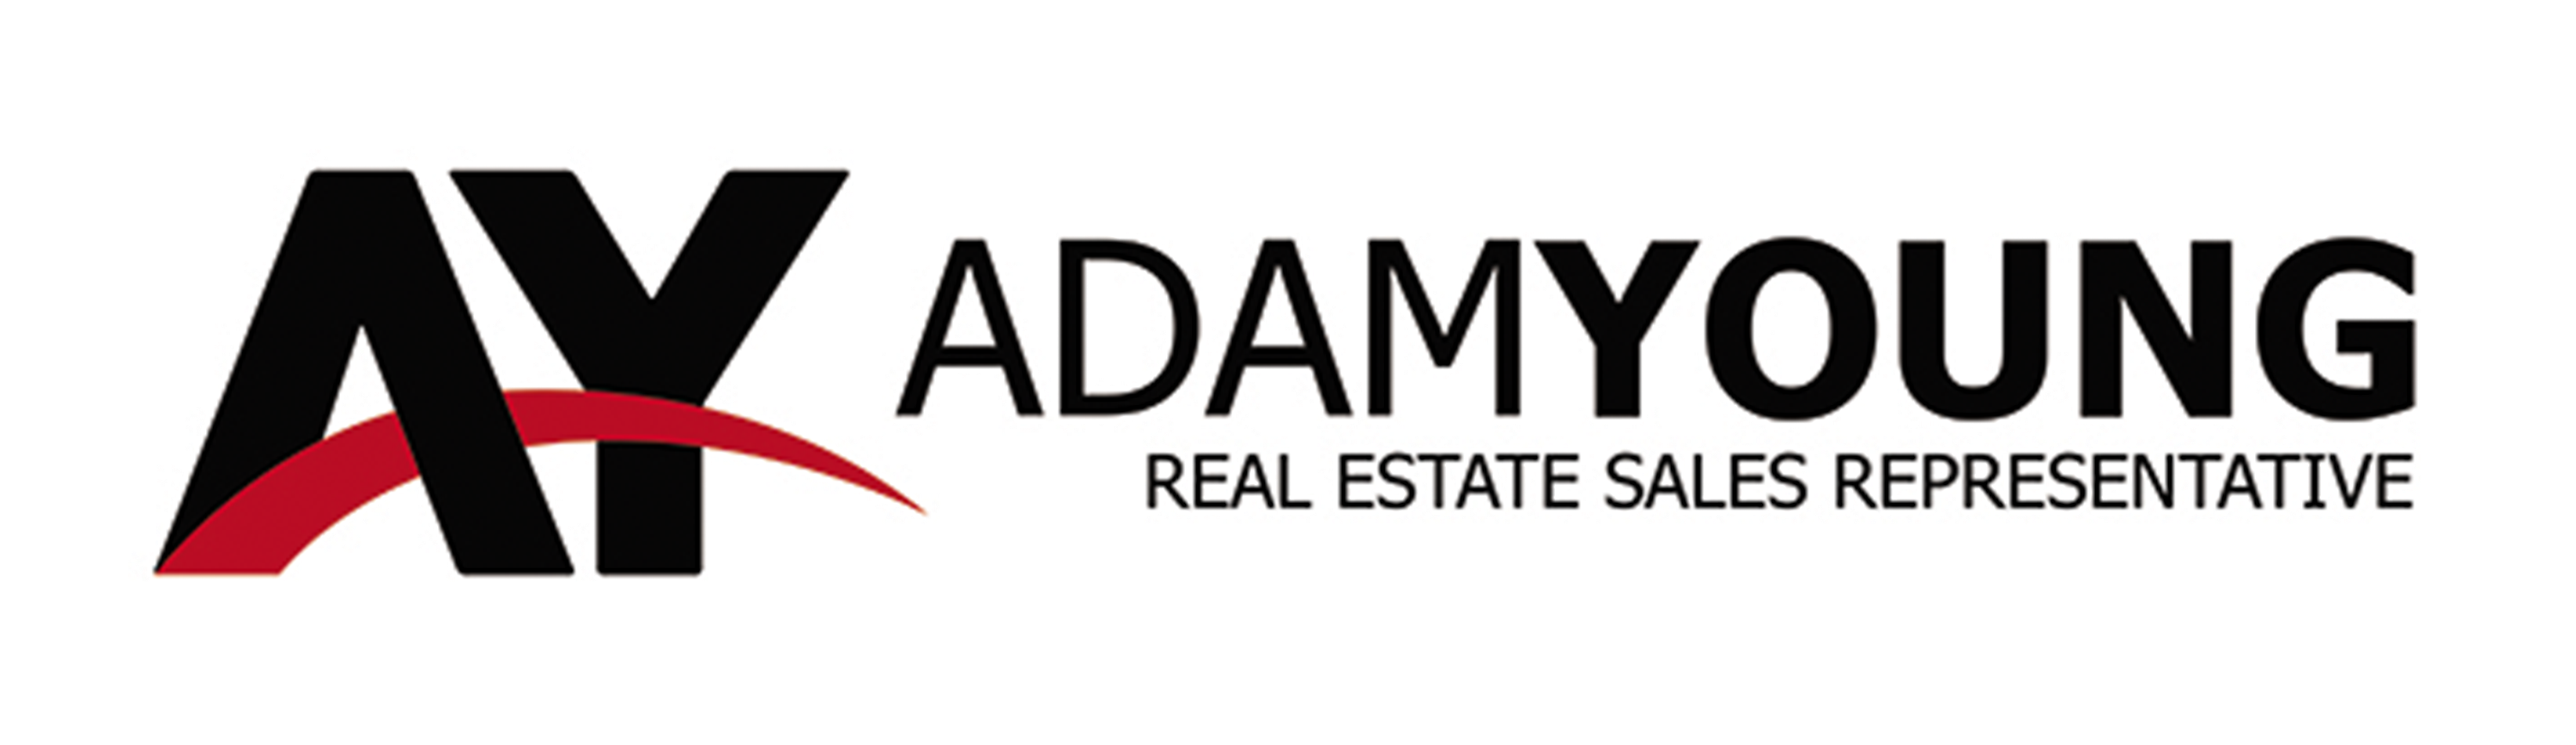 ADAM YOUNG REAL ESTATE